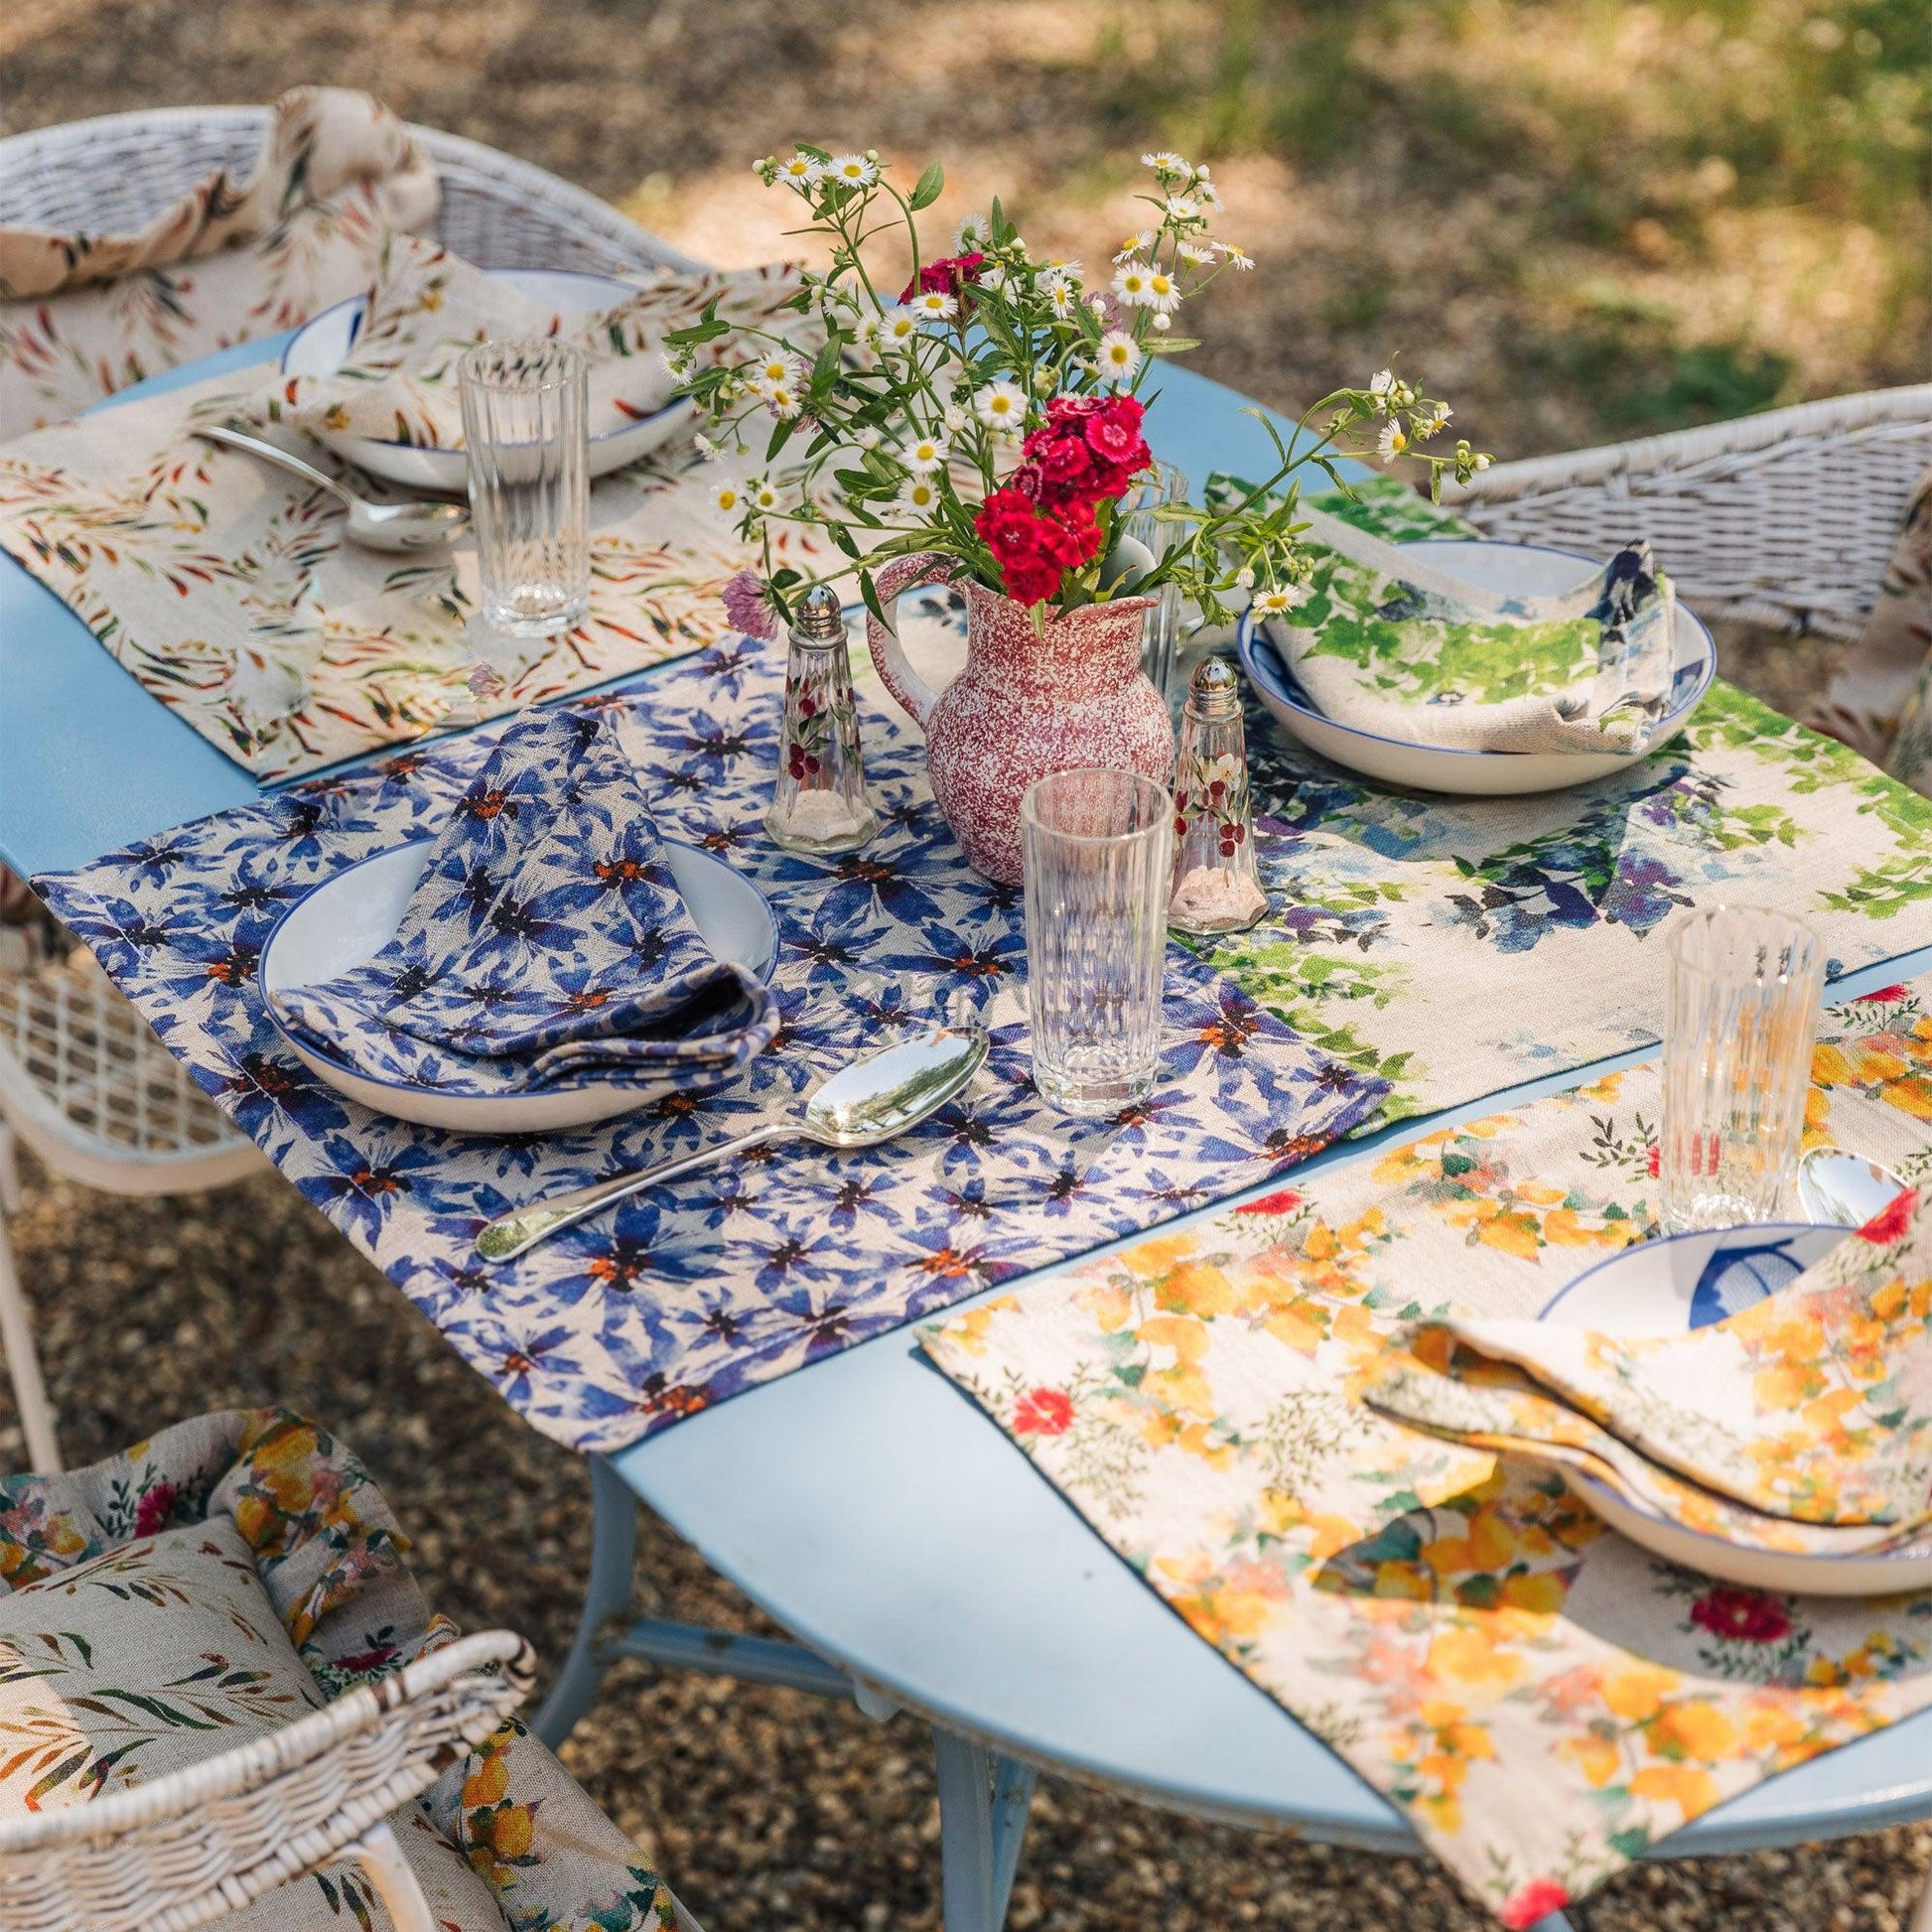 Outdoor table setting designed by Sophie Williamson Design.